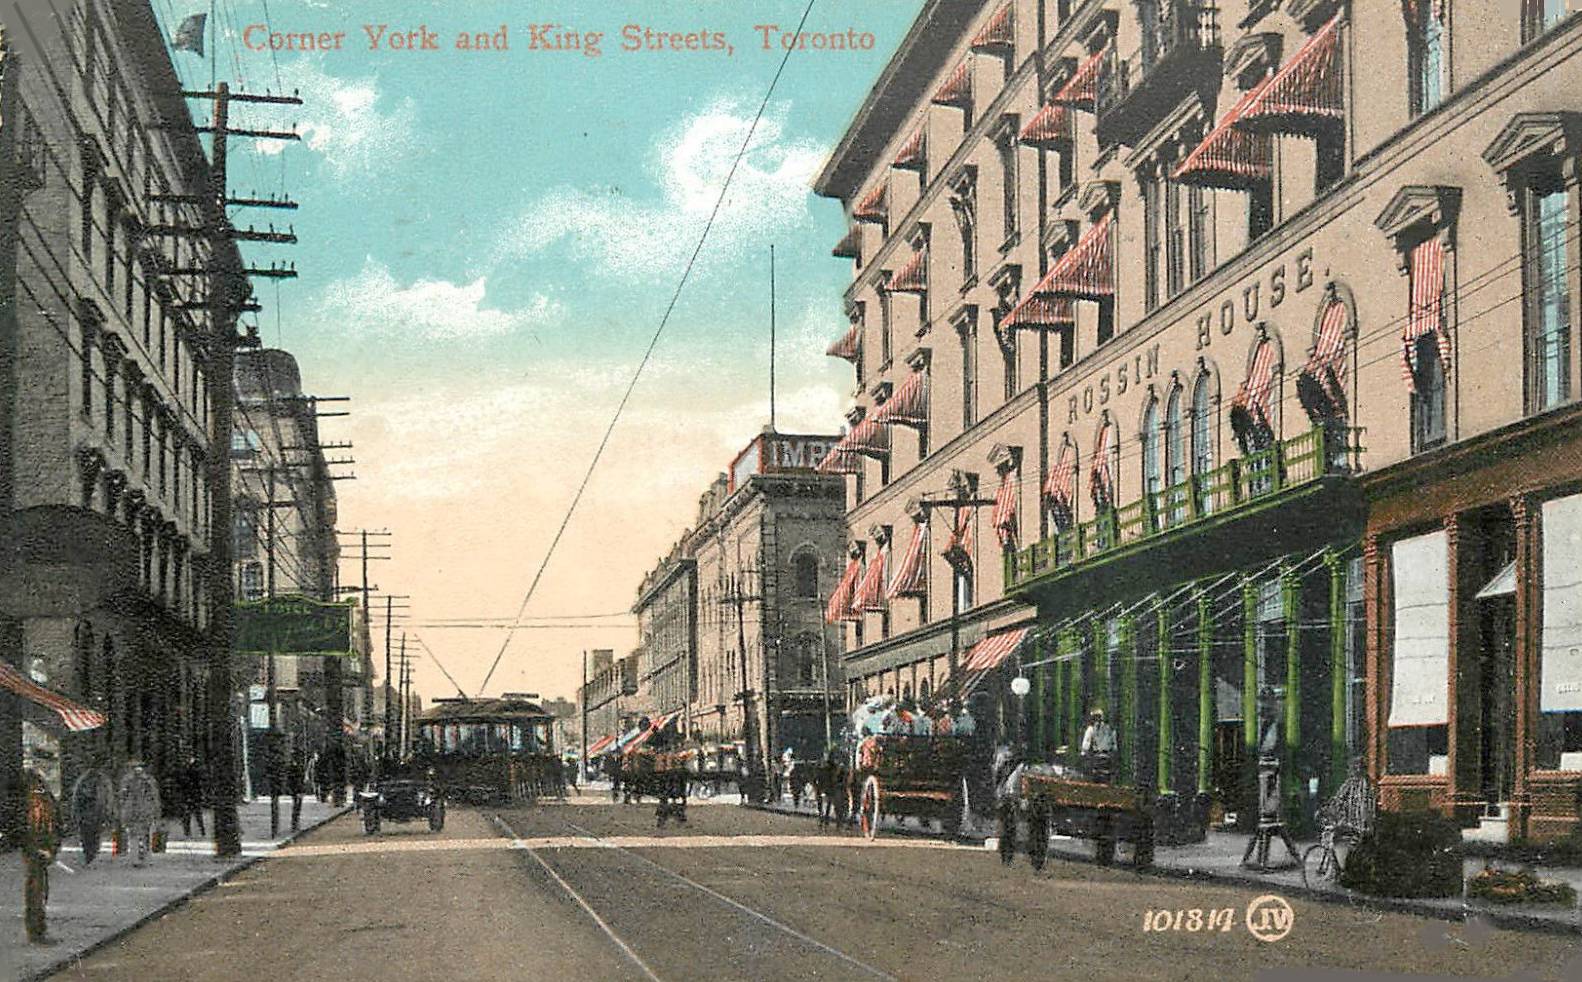 xx postcard - toronto - york and king - ground level view - rossin house - wagons - streetcars - car - pedestrians - nice version - tinted - 1908